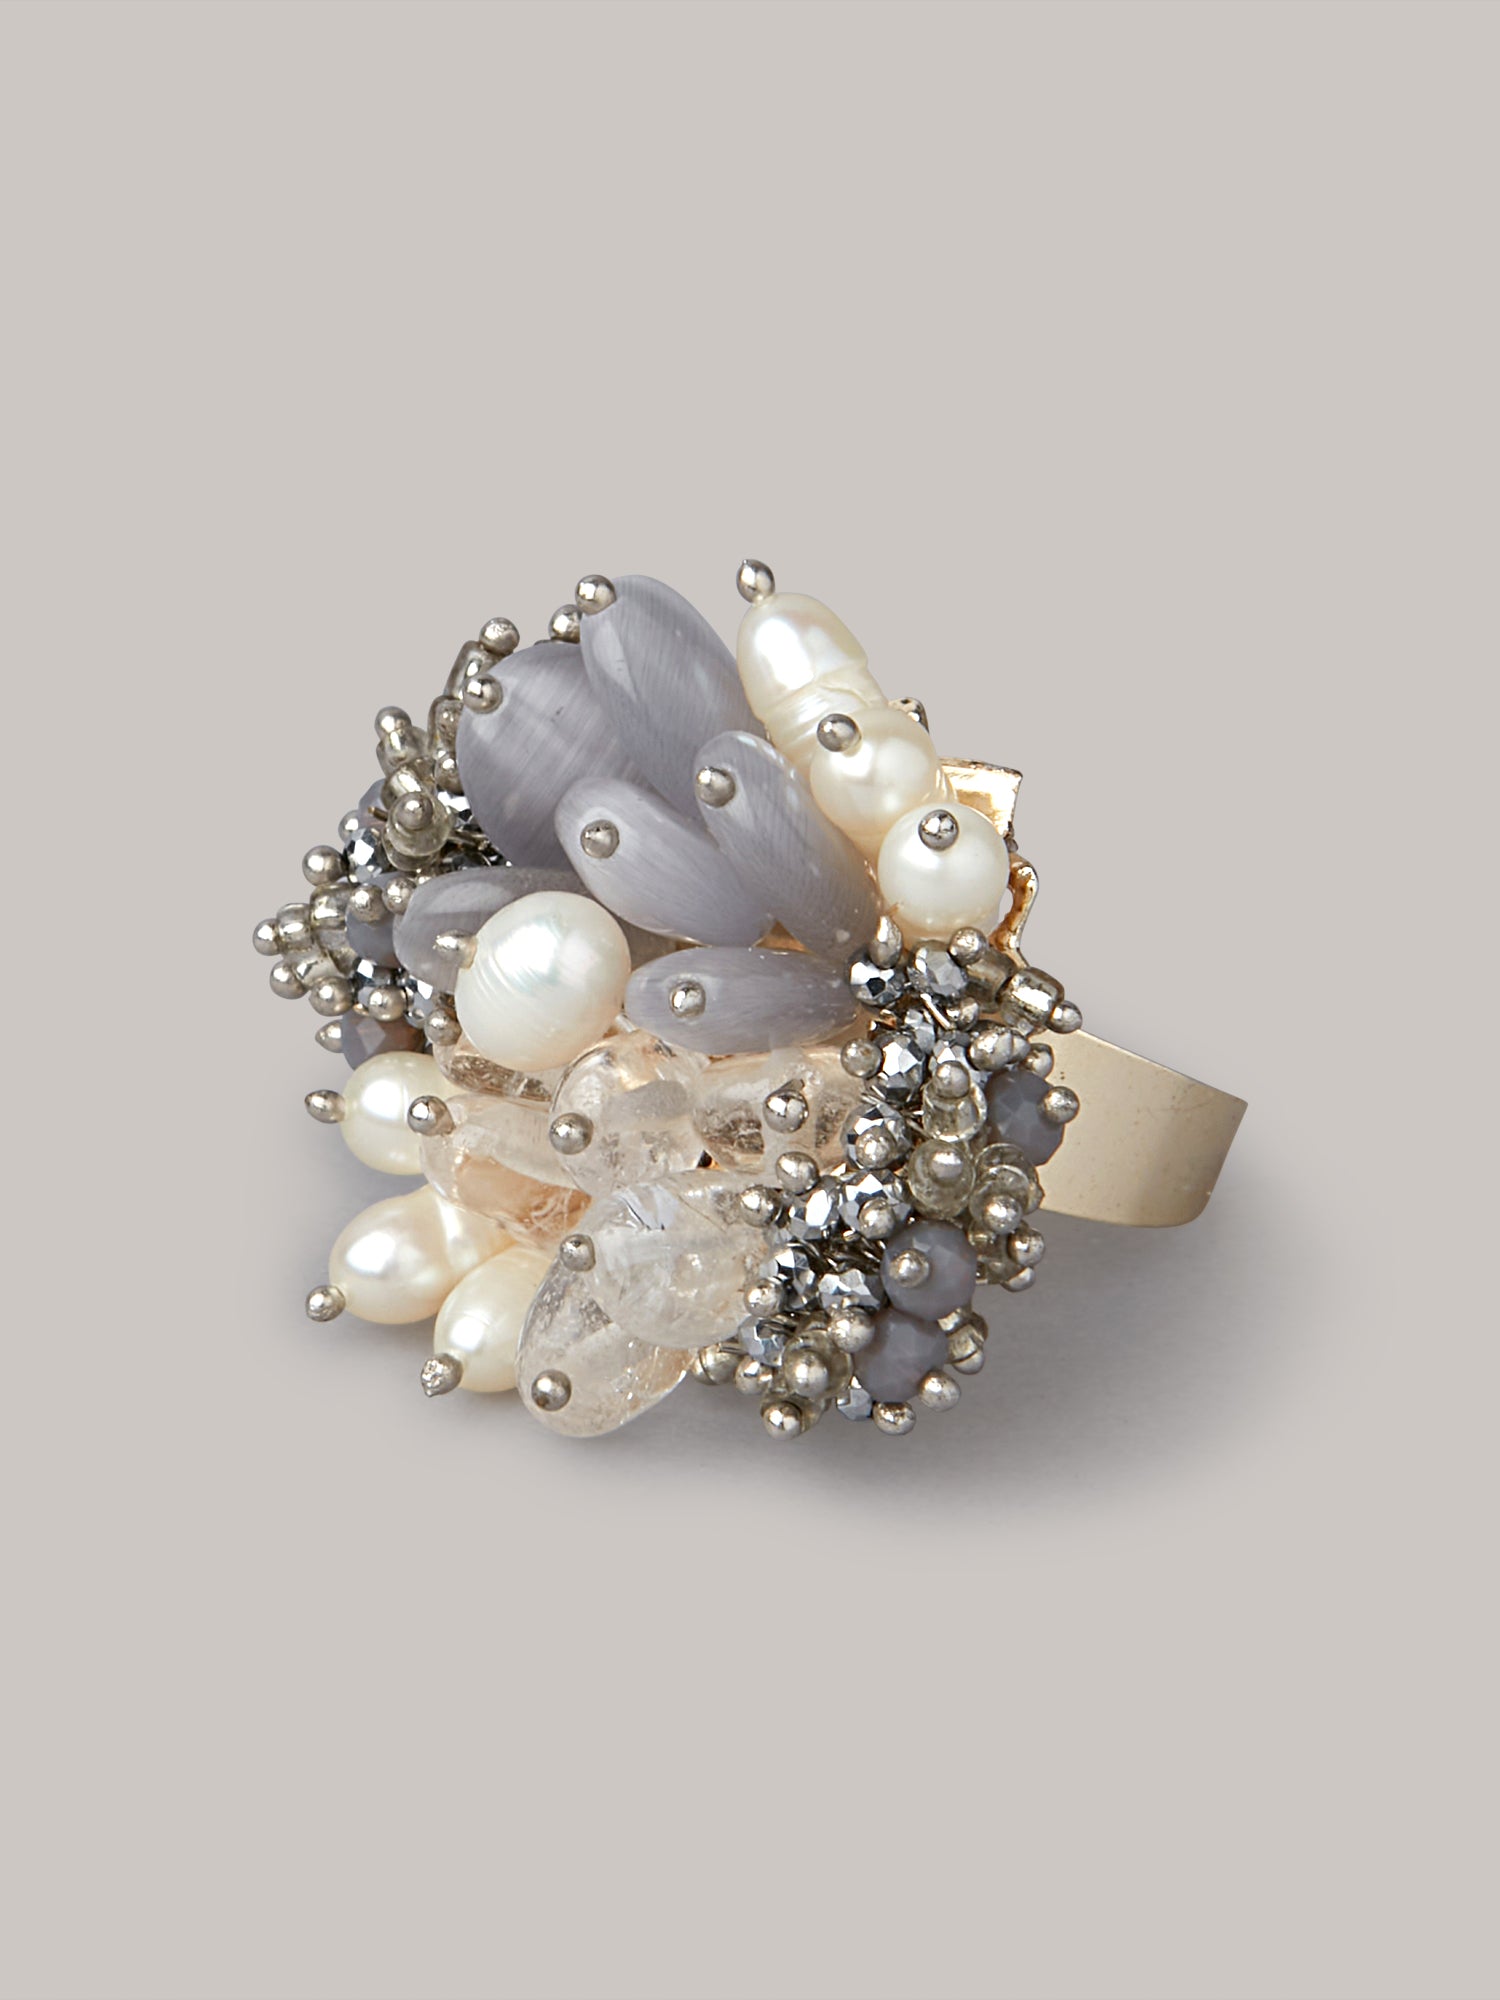 Amama,Designer Beaded Bracelet With Pearls And Stone In Grey And Off-White